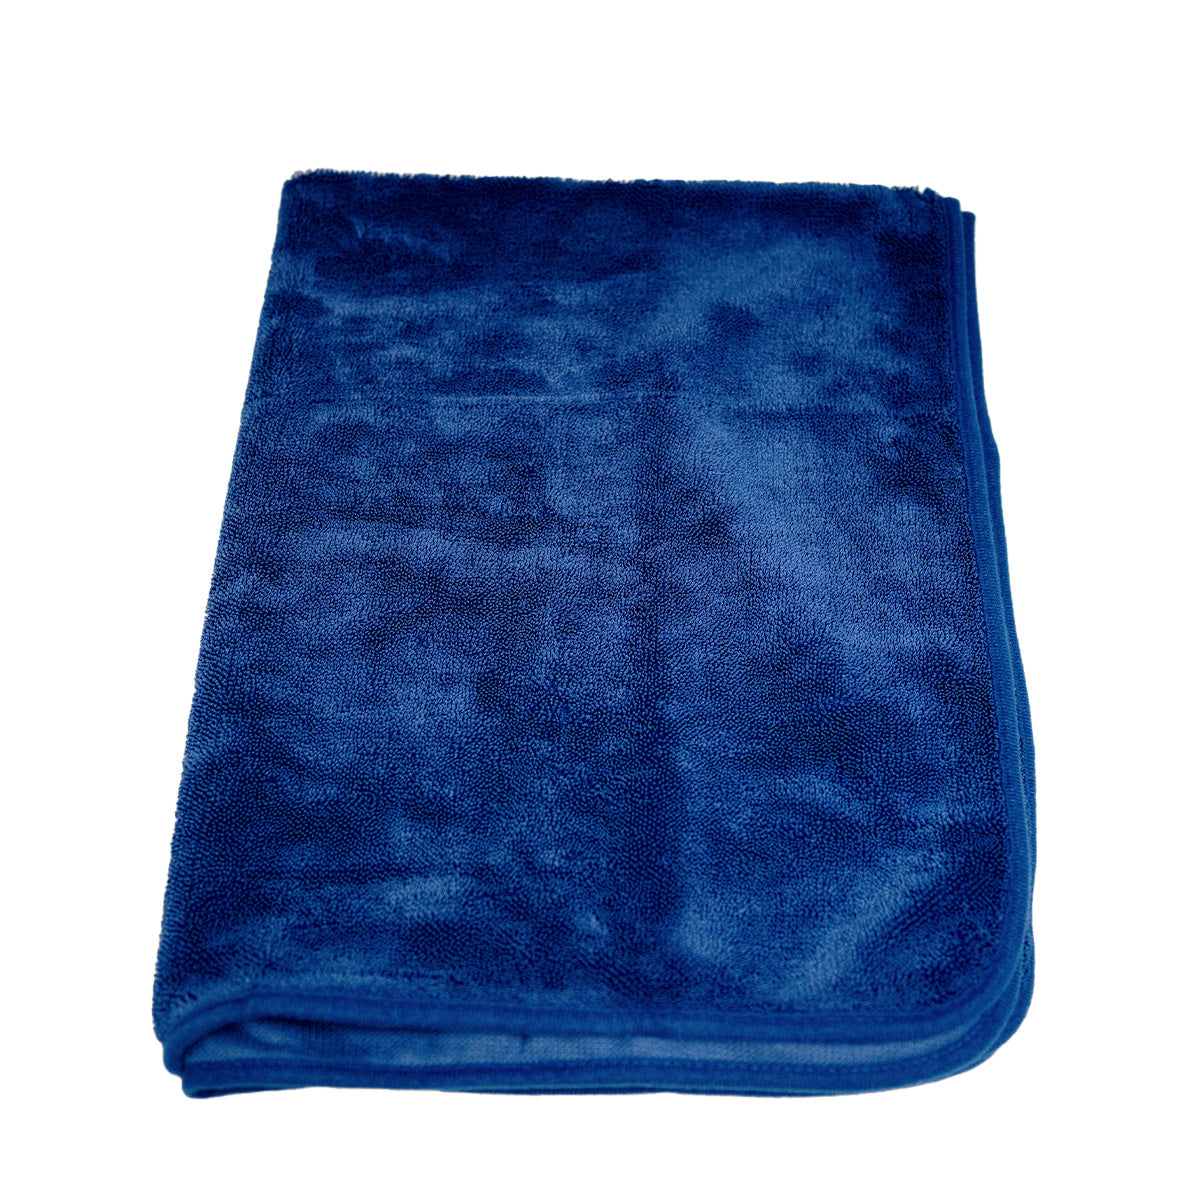 Labocosmetica twisted dual drying towel. Dual tommy microfibre drying towel. Mafra Drying towel. Best drying towel for glass and paintowork. safe car drying. Labocosmetica Ireland